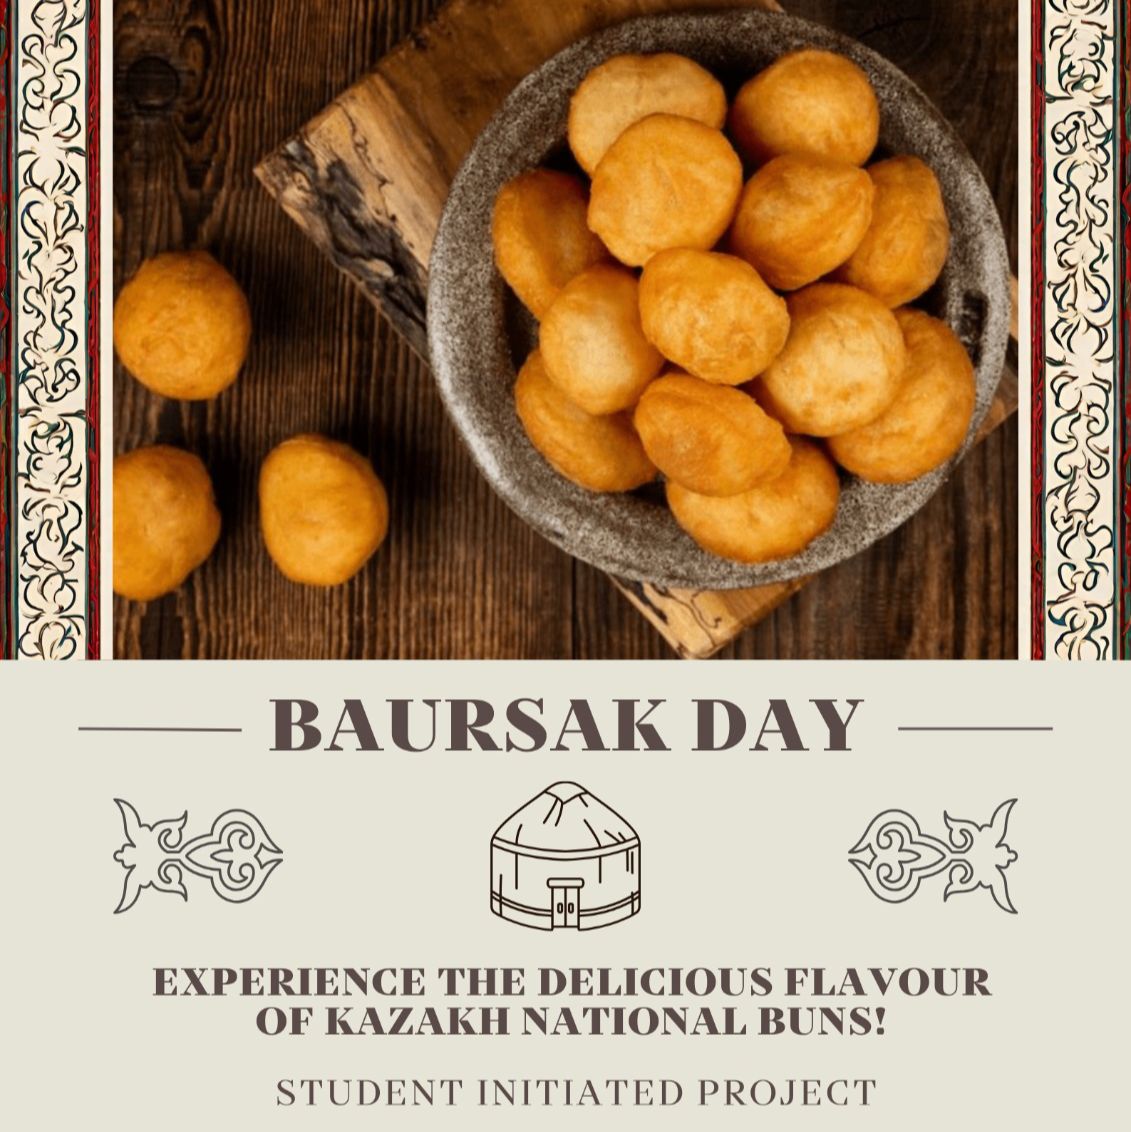 Baursakh Day: A Culinary Journey of Connection